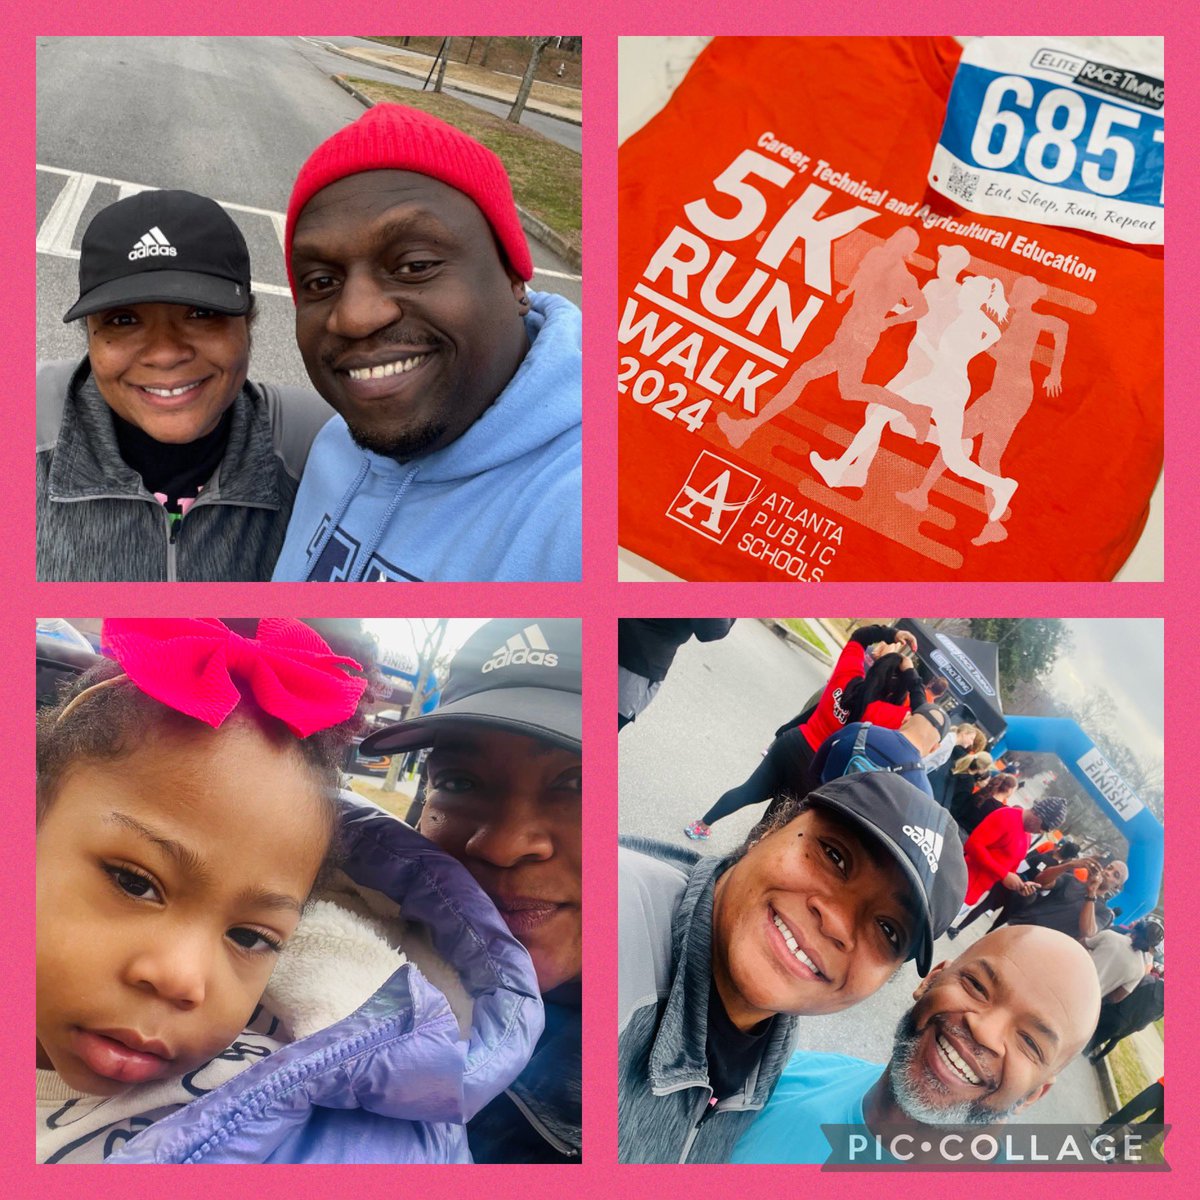 Finished my first 5K with my mini me in tow!!! Great job today @ctae_in_aps🧡 !! Loved running with my people this morning @CoachDavisinPE and @TheoSmithJrEdD!! @apsupdate @APS_HPE